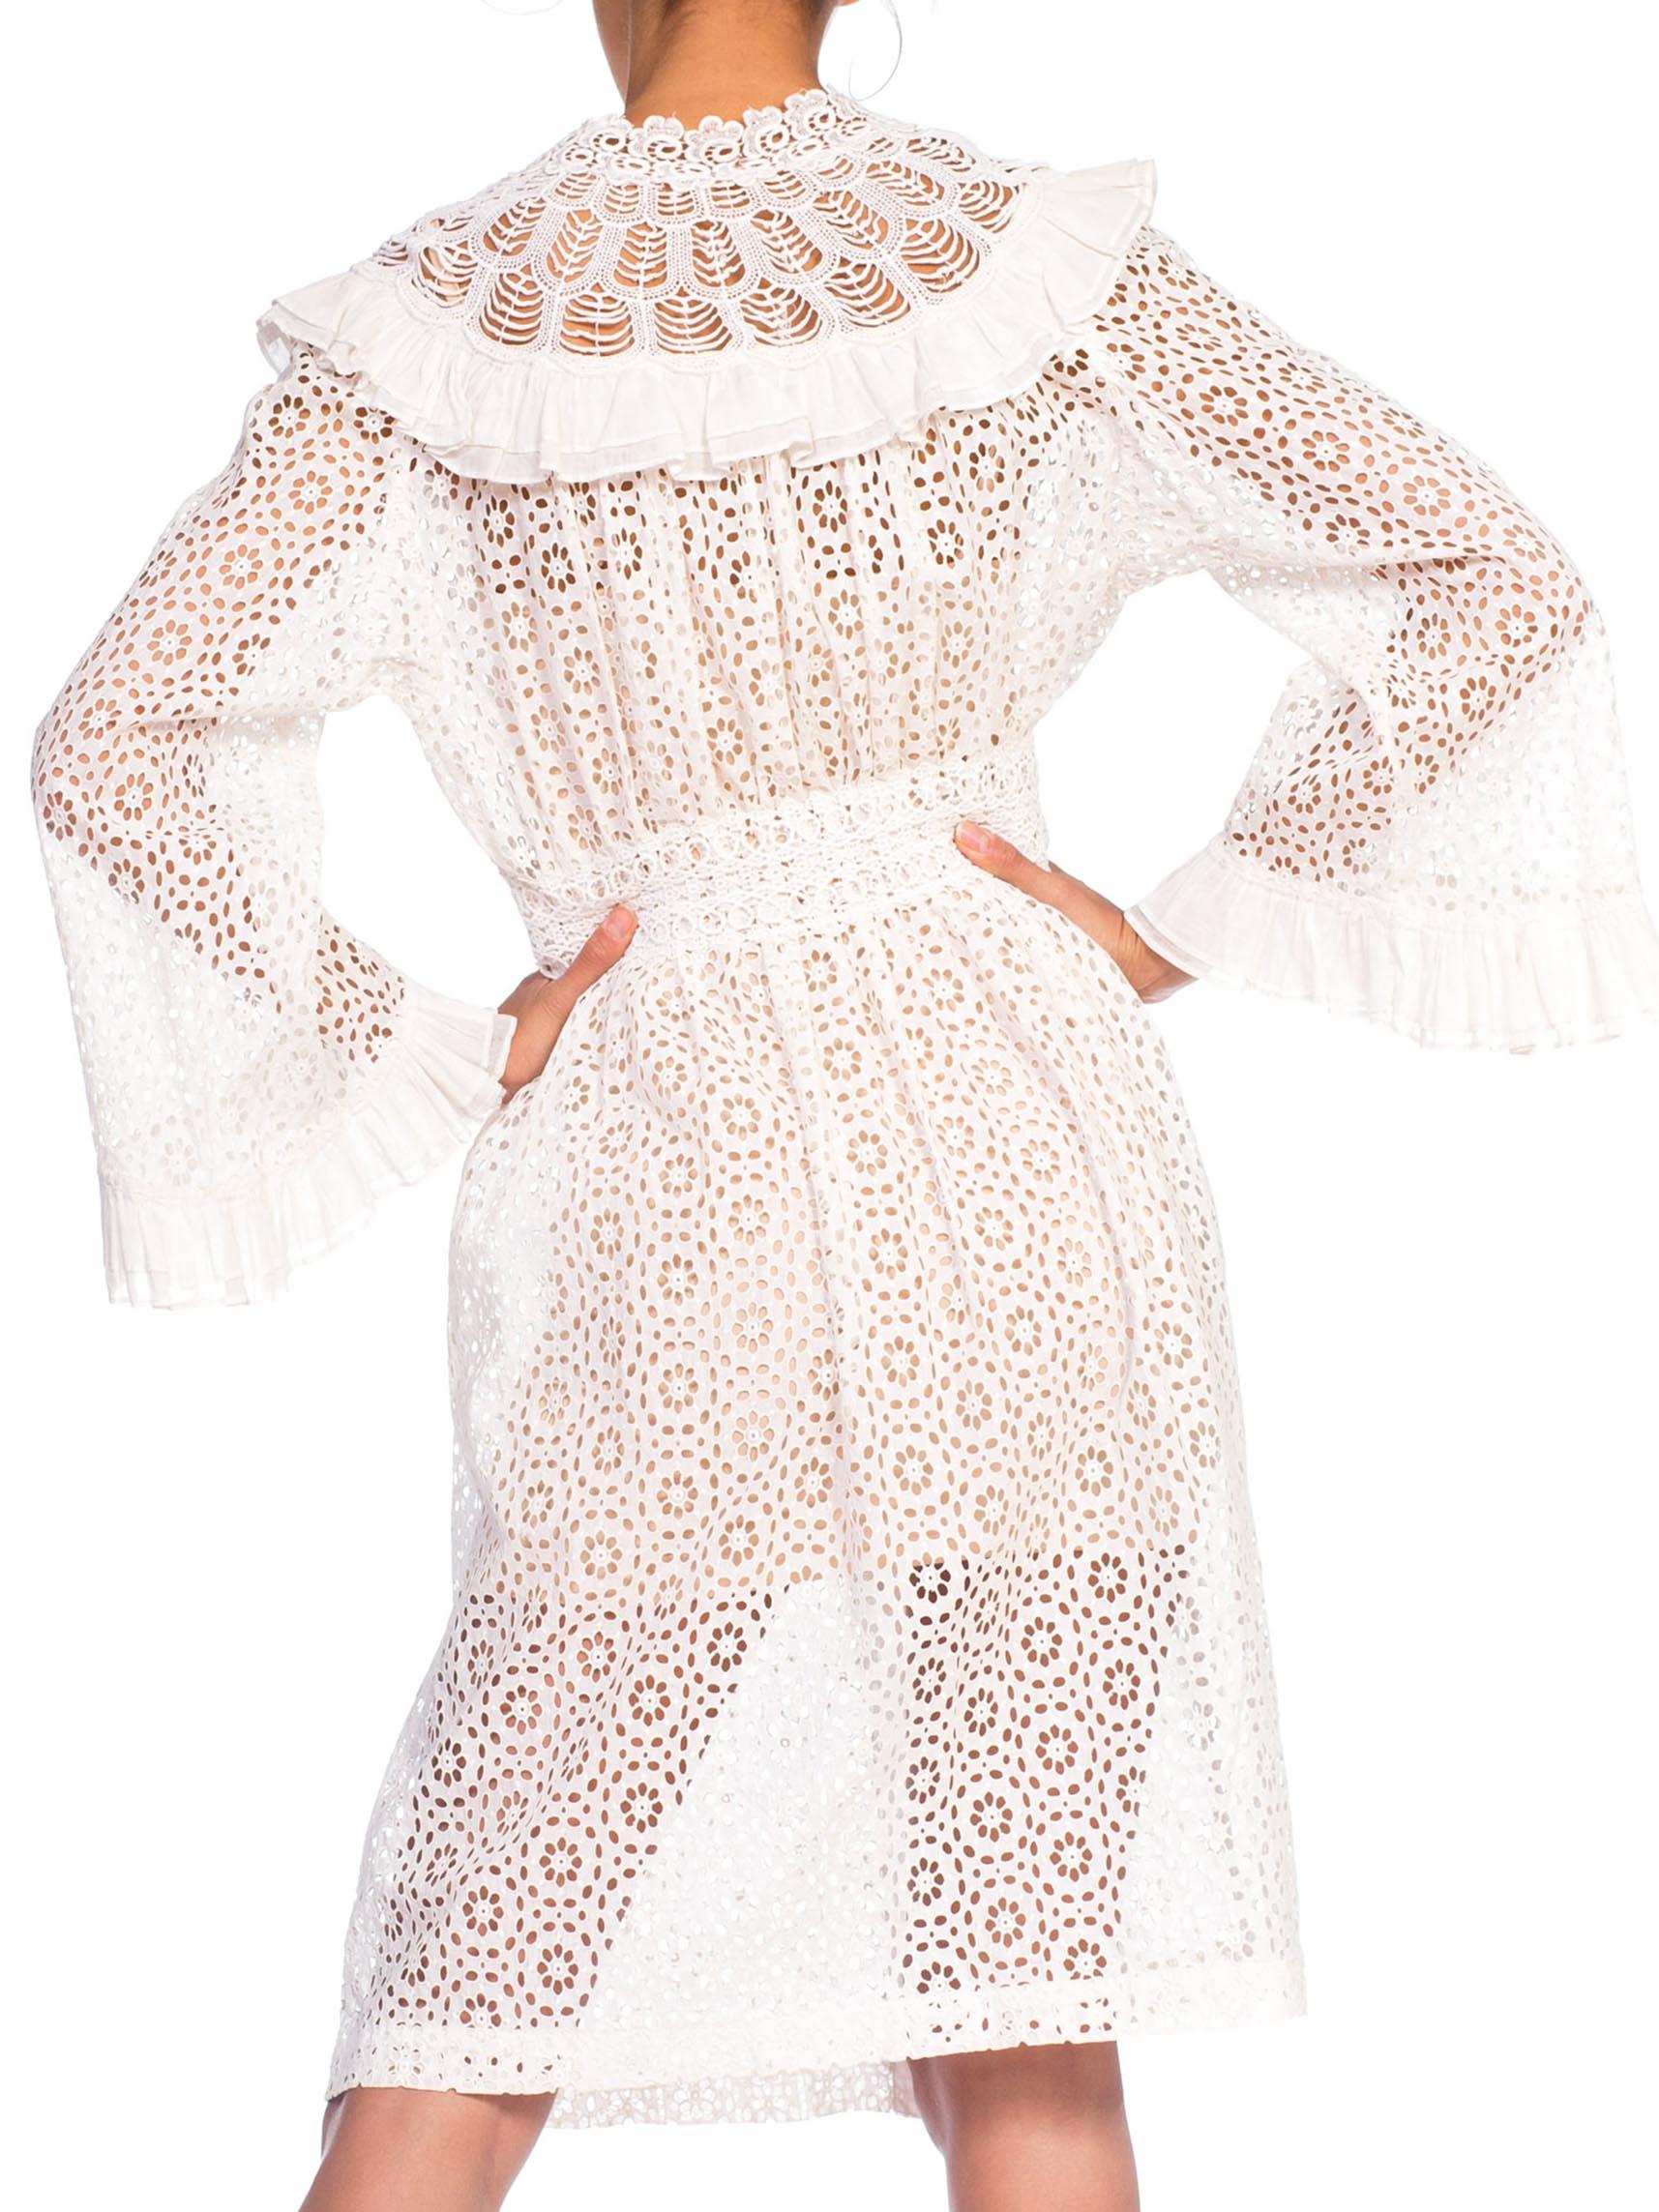 MORPHEW COLLECTION White Organic Cotton Belle Sleeve Dress With Ruffle Detail Made From Victorian Eyelet Lace Duster
MORPHEW COLLECTION is made entirely by hand in our NYC Ateliér of rare antique materials sourced from around the globe. Our